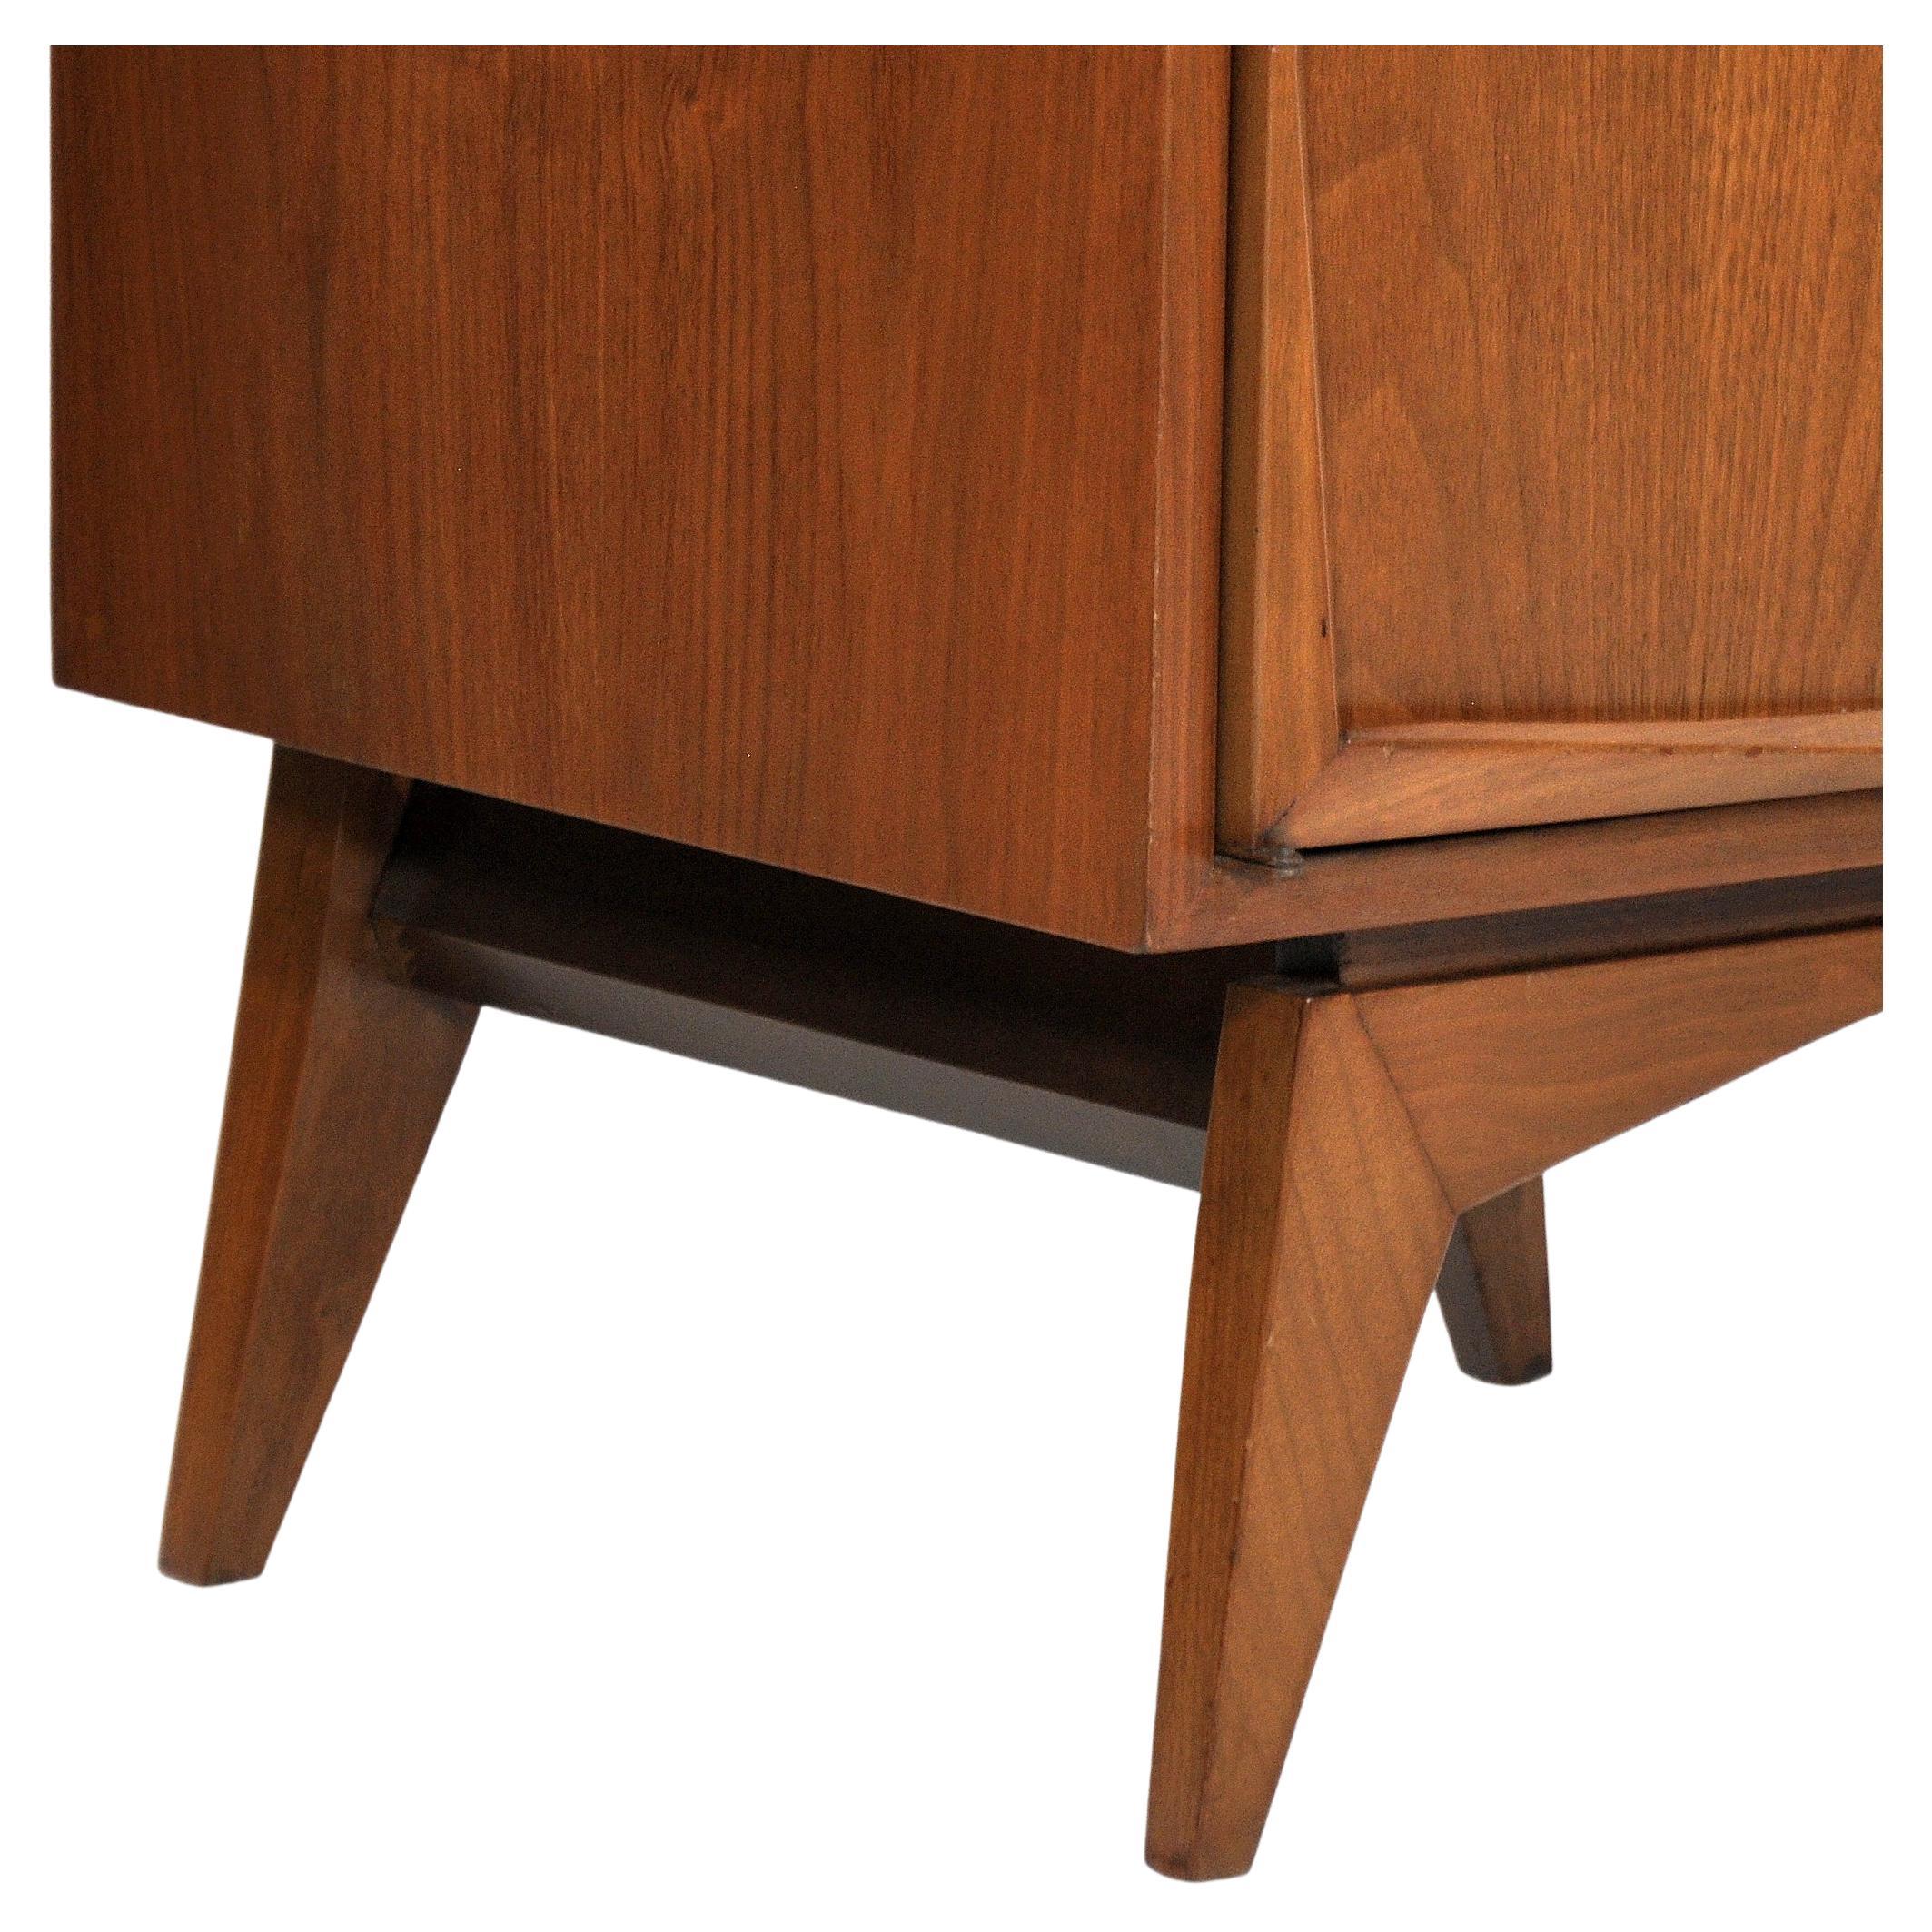 A striking pair of vintage walnut end or bedside tables dating from the late 1950s to early 1960s. The sculptural occasional tables features a cabinet door with sculpted fronts opening to an interior fitted with a glass shelf, resting on a base with